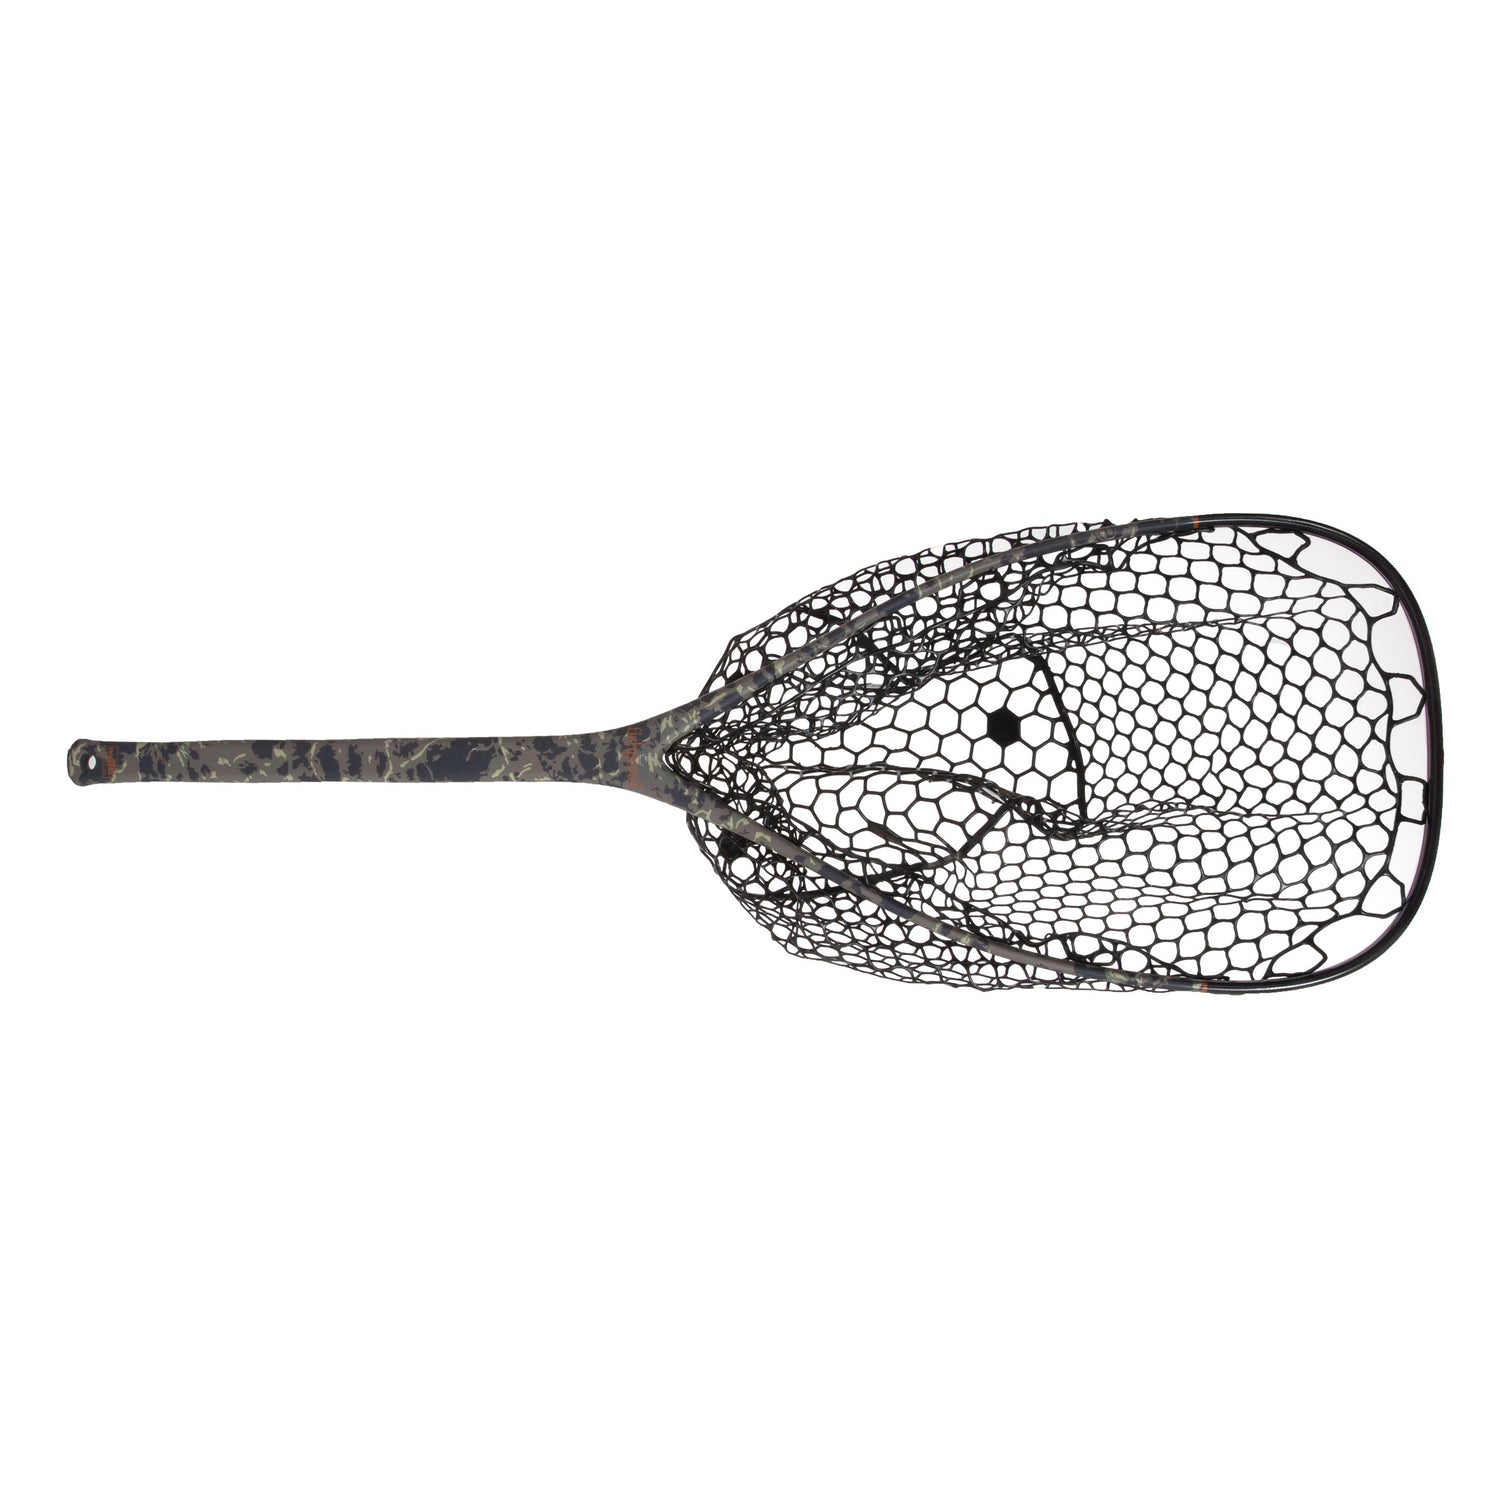 19 Nomad Replacement Rubber Net - Fly Fishing – Fishpond